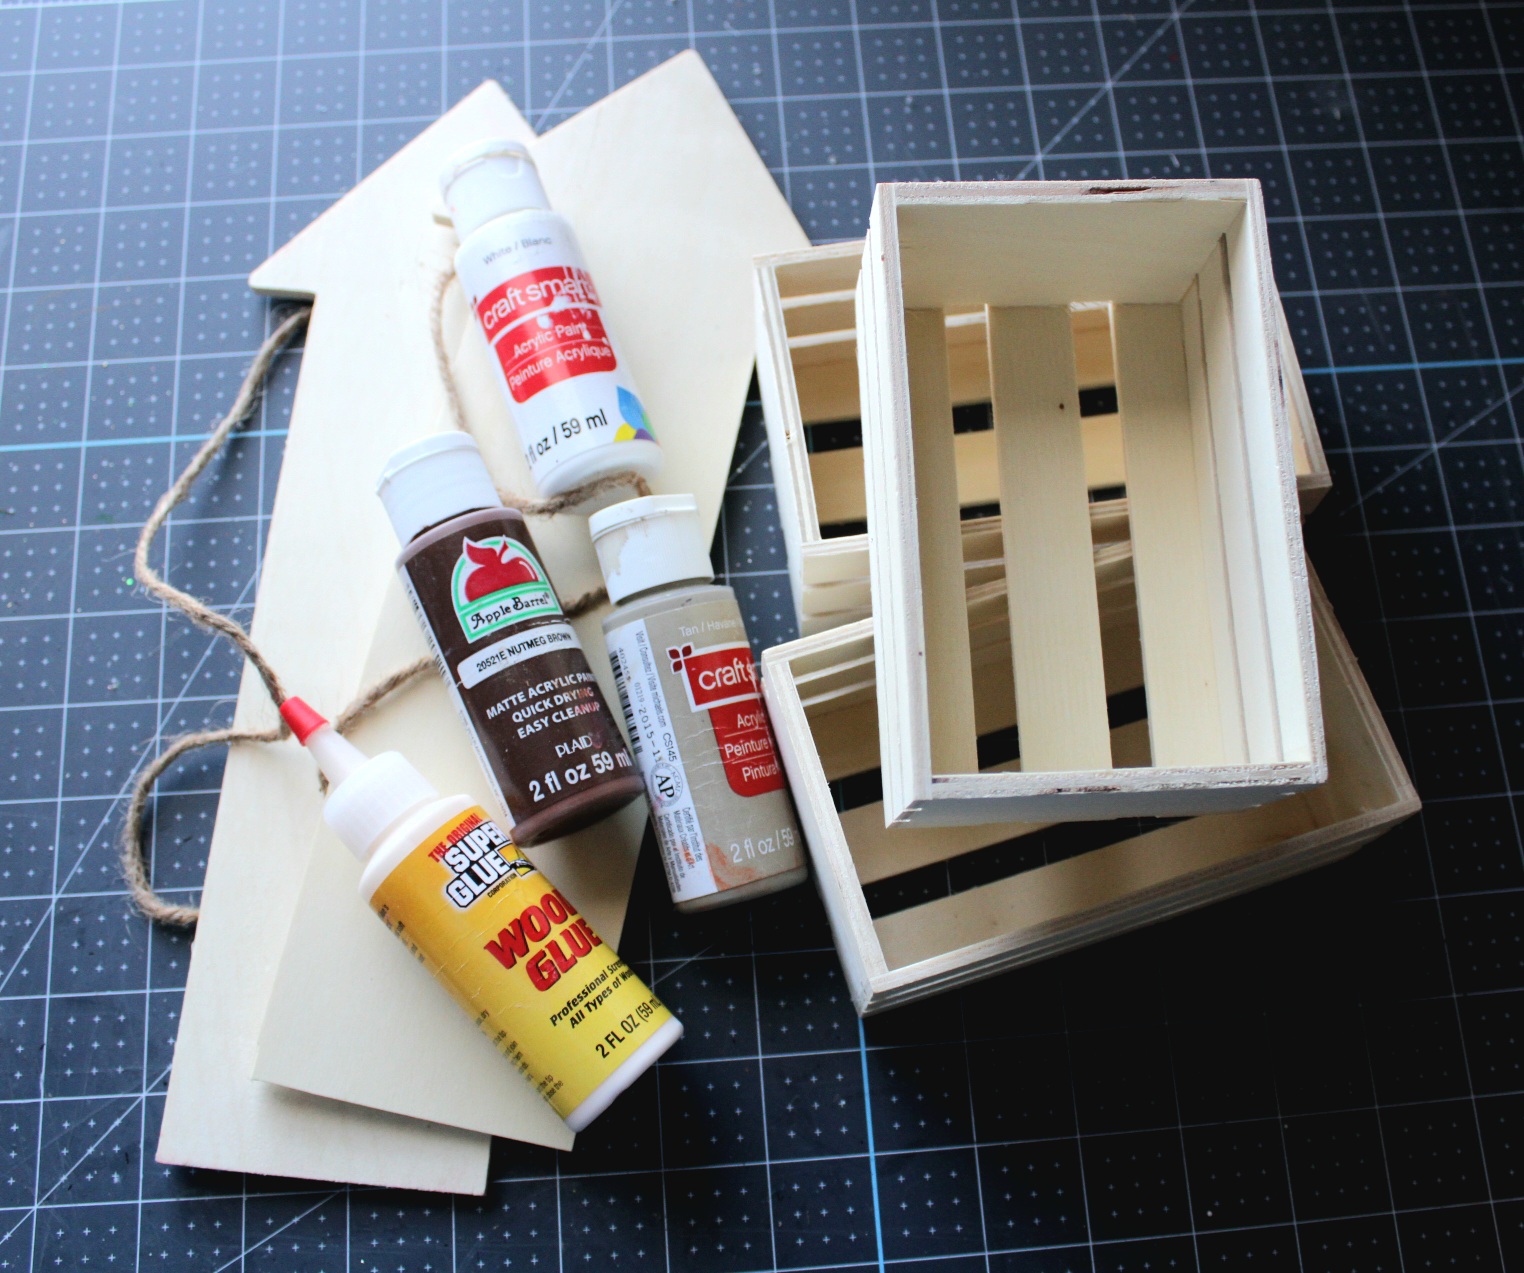 Supplies for a Dollar Tree crate shelf: 2 wood arrows, 3 small crates, wood glue, and black, tan, brown, and white acrylic paints.